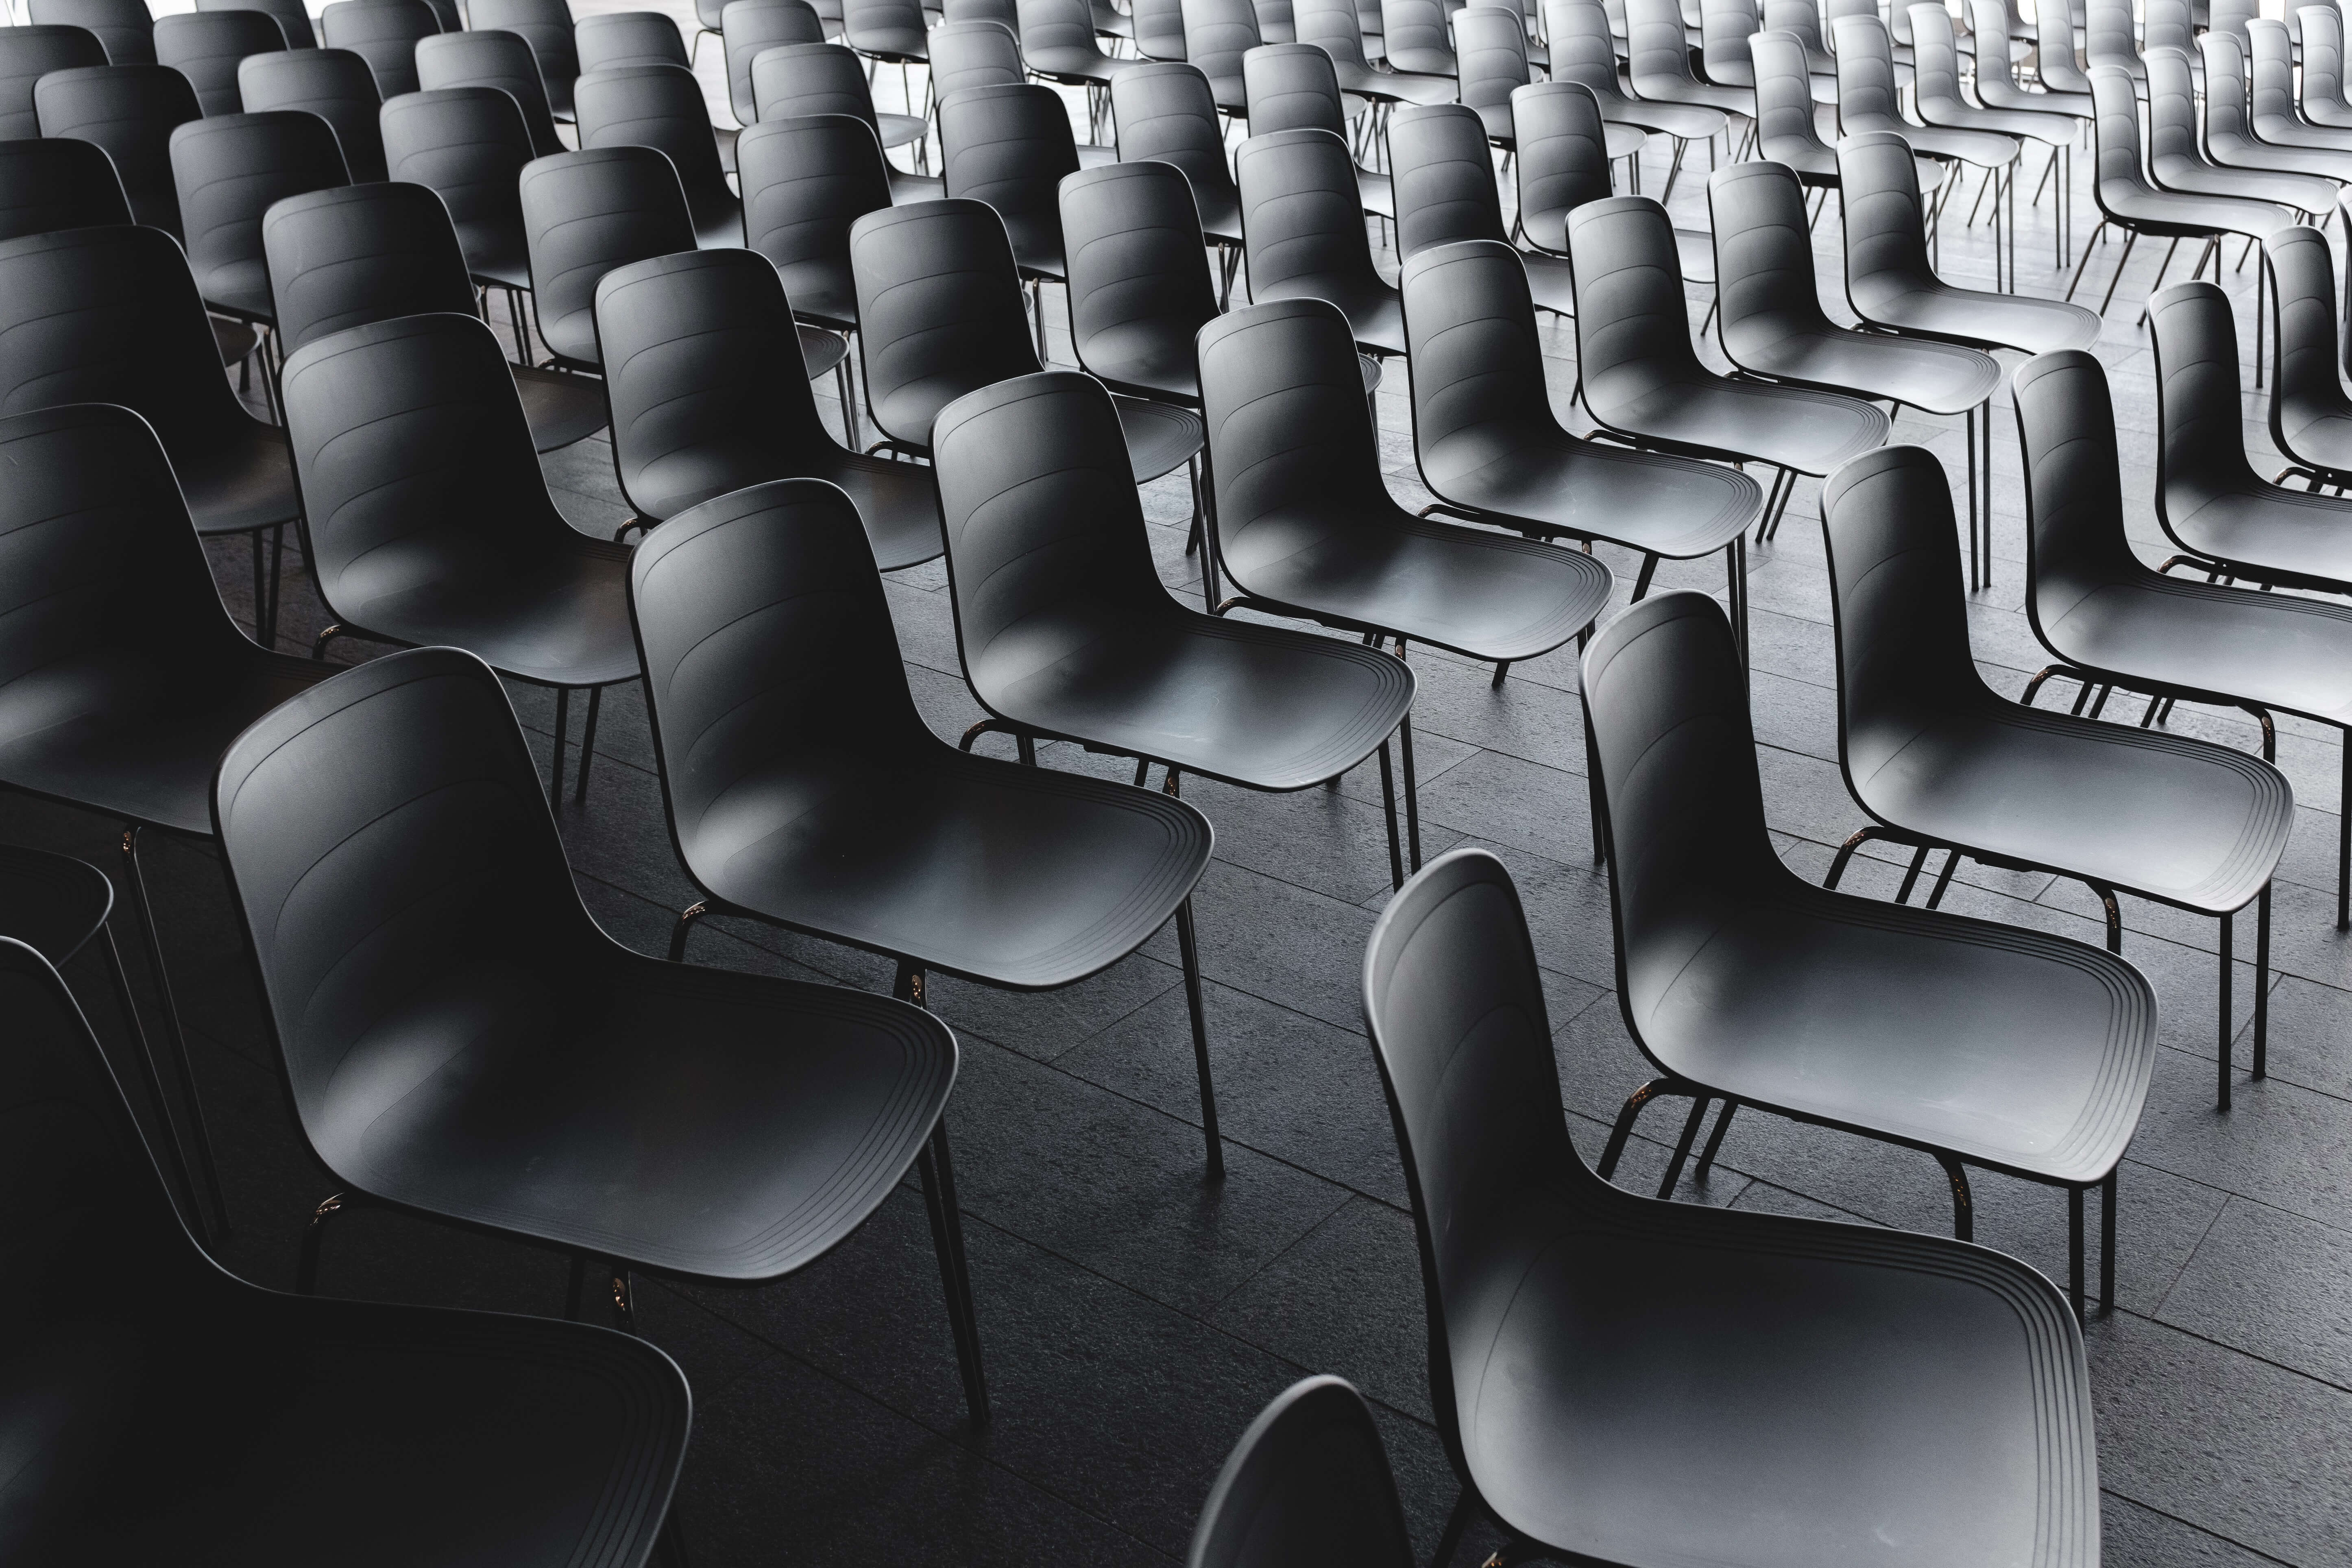 A black and white photo of rows of classroom-style chairs